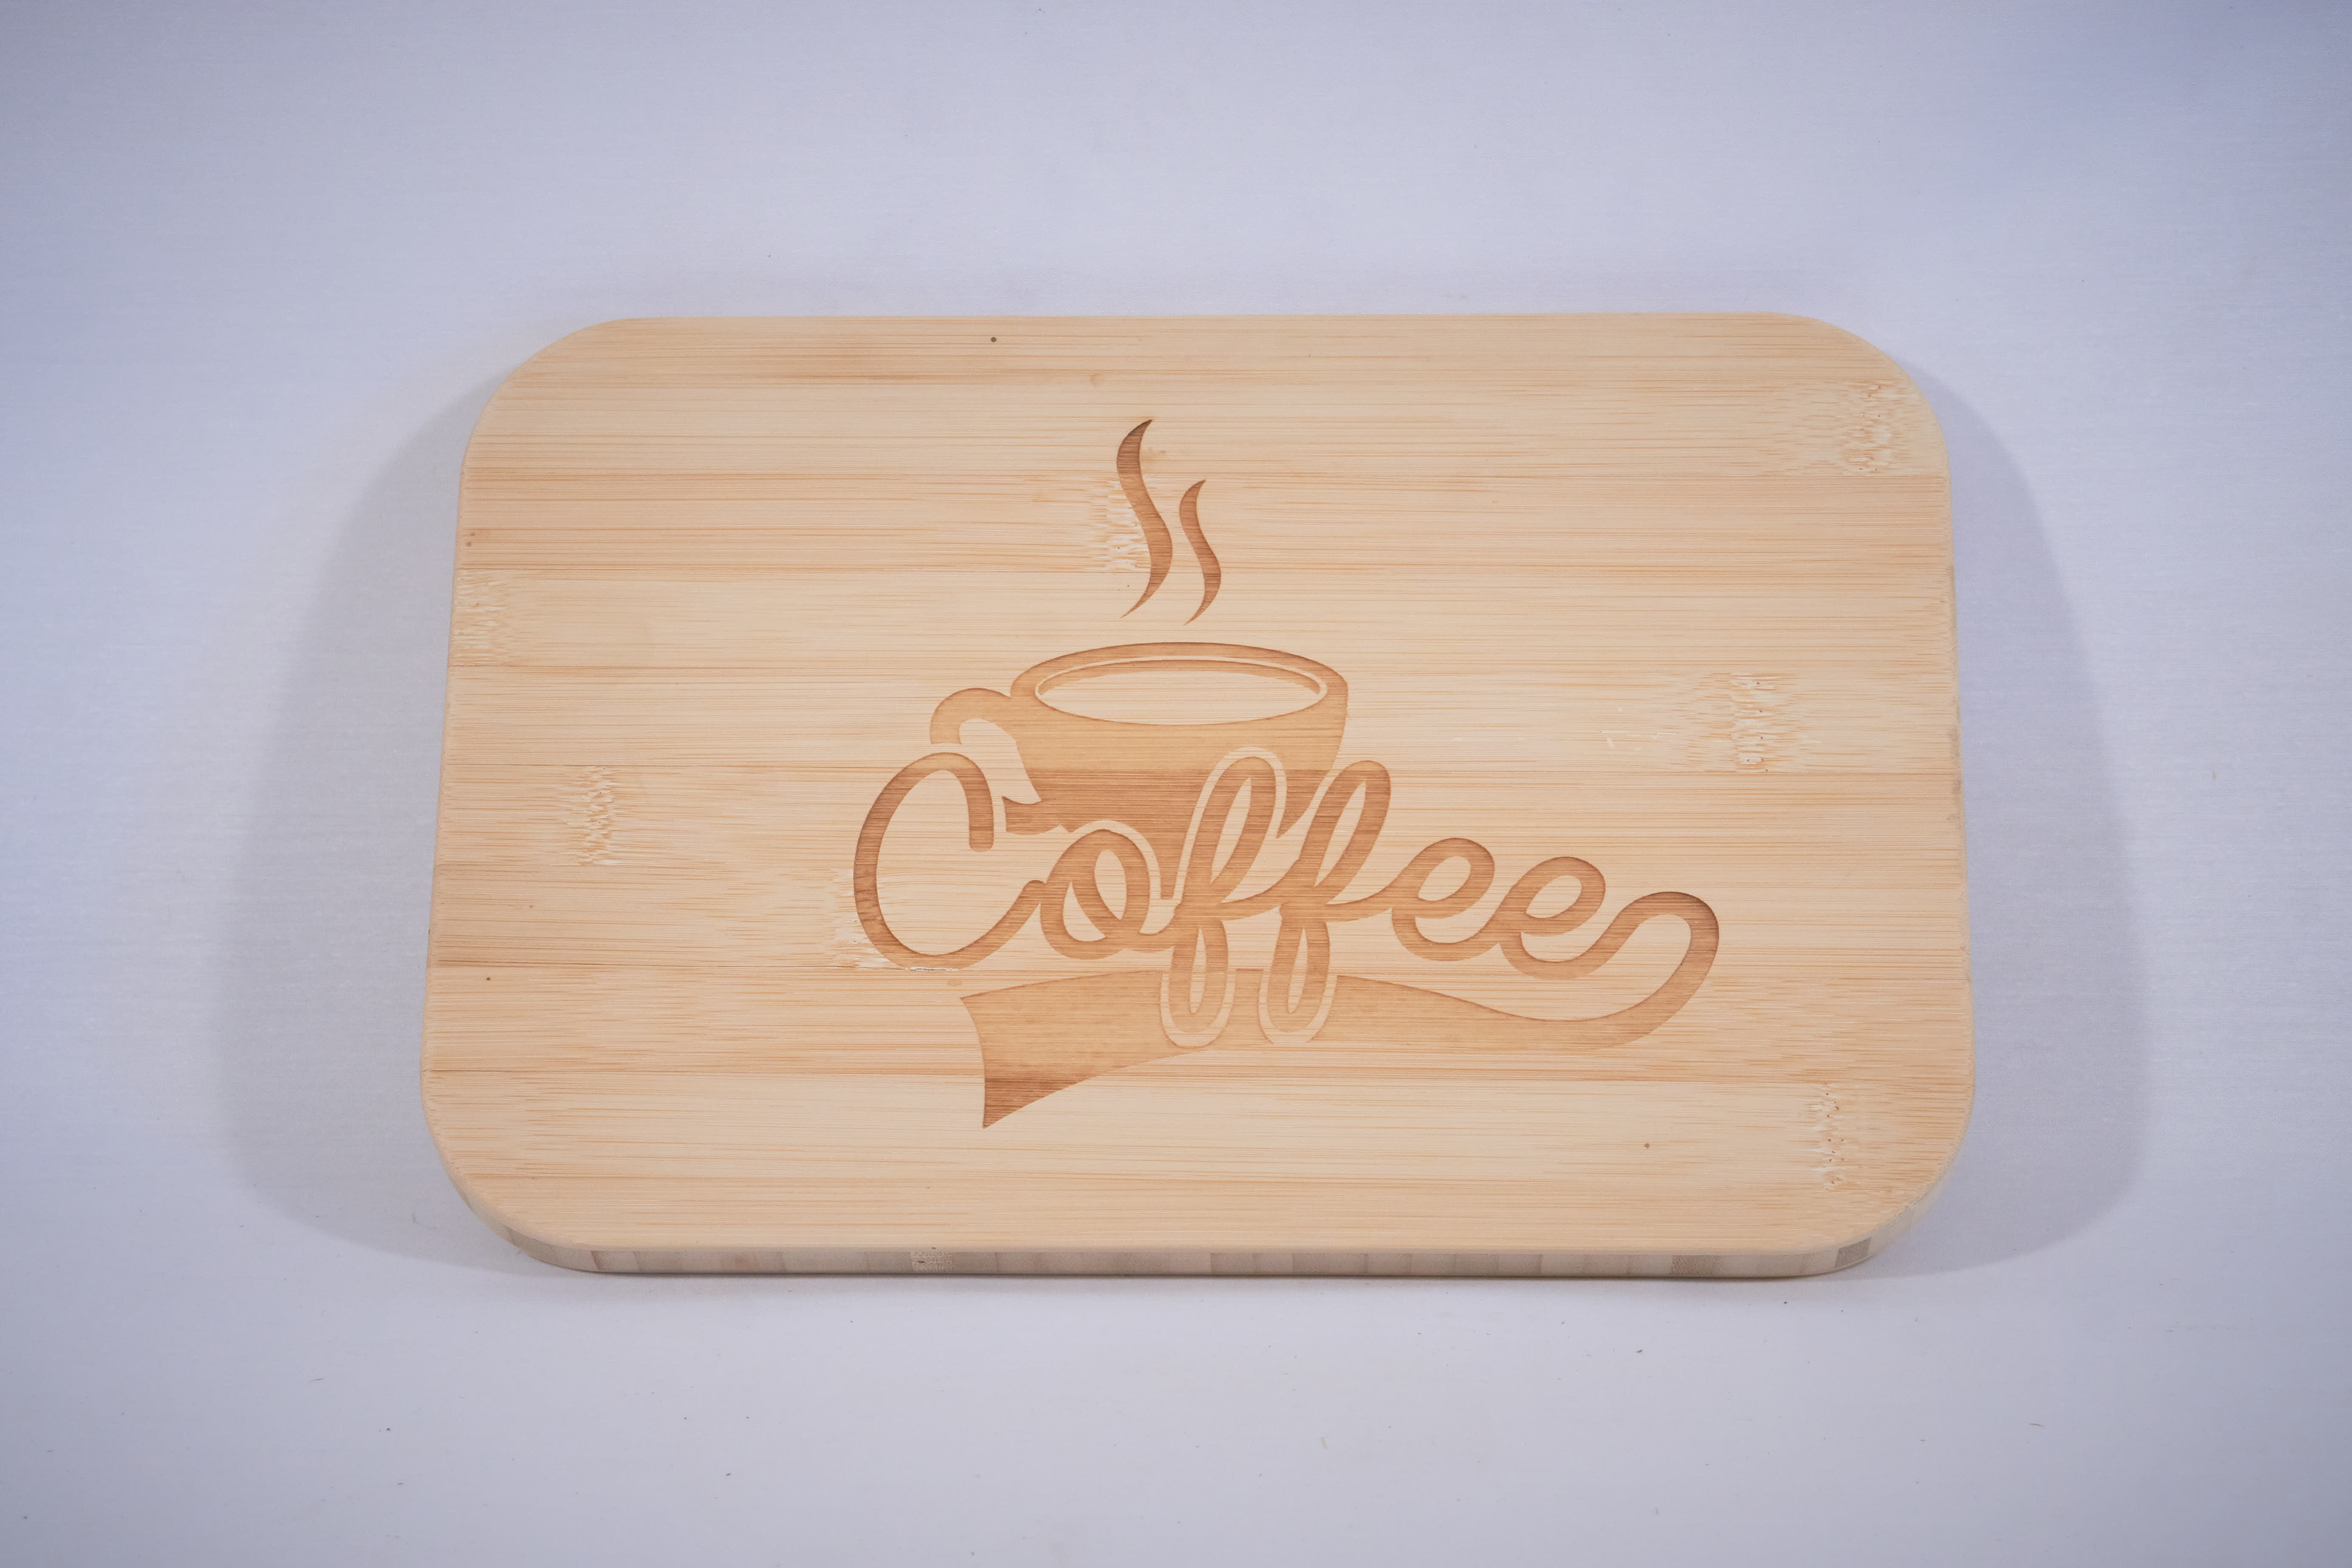 A bamboo cutting board with a laser engraving